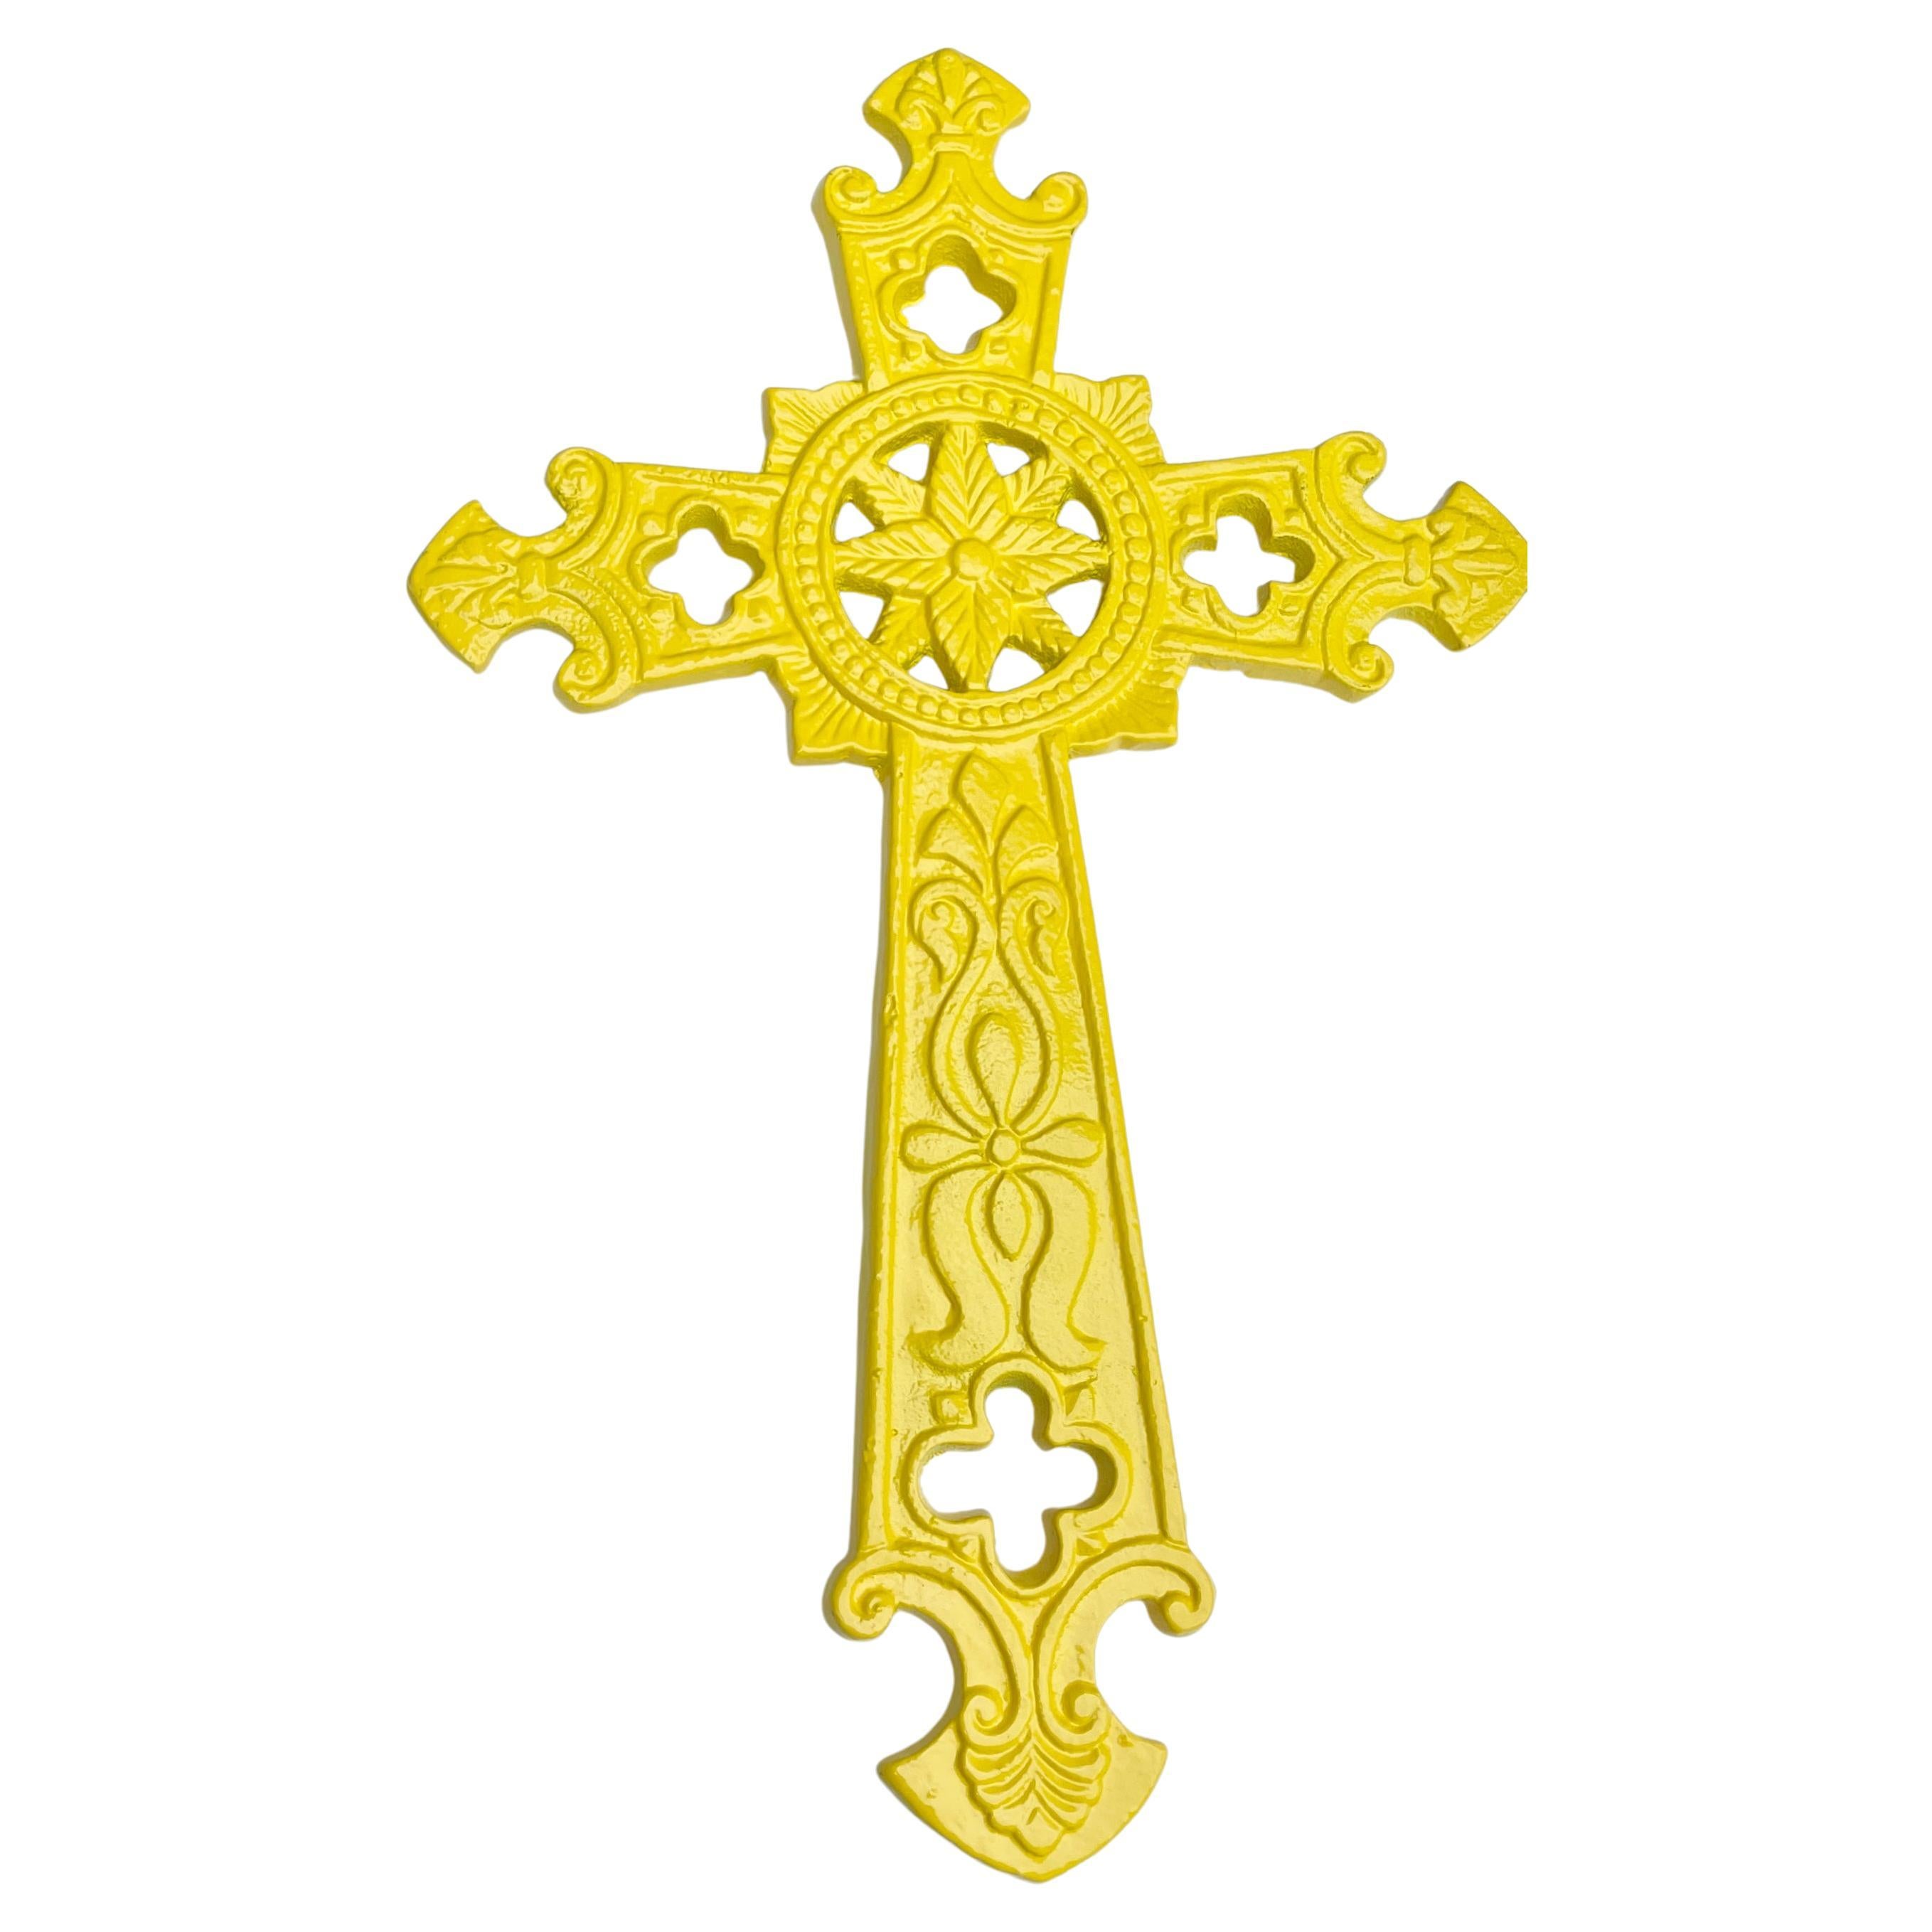 Set of Two Powder-Coated Crucifixes in Yellow and White In Good Condition For Sale In Haddonfield, NJ